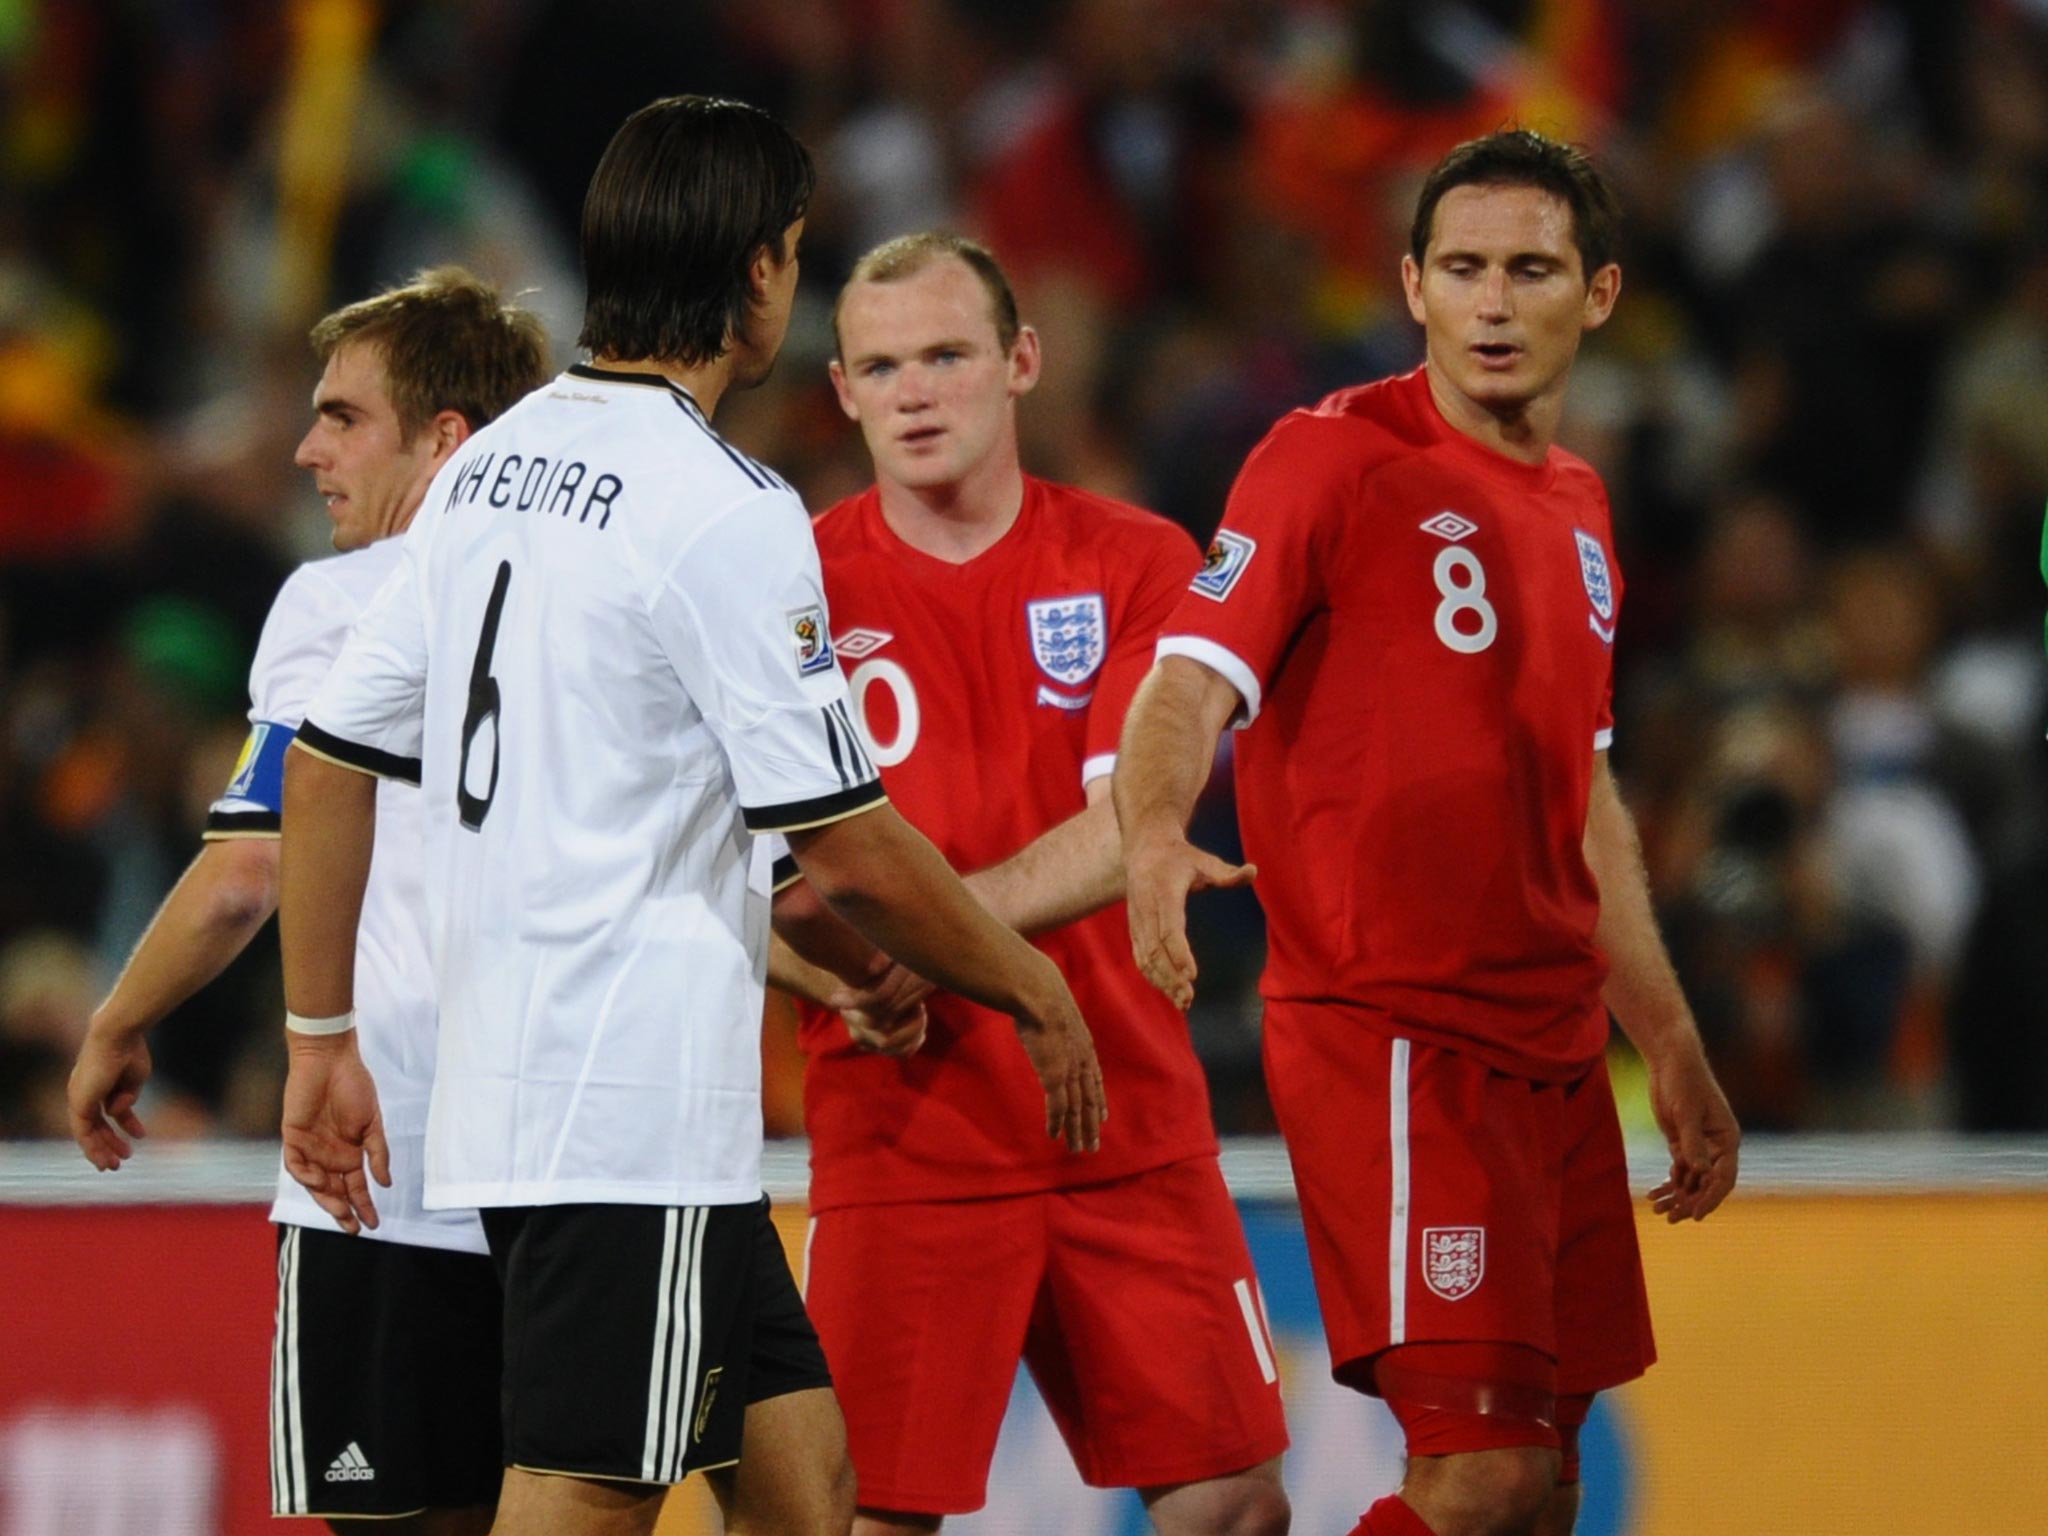 Wayne Rooney and Frank Lampard after England’s 2010 World Cup exit at the hands of Germany. Action is needed if the cycle of international failure is to be broken